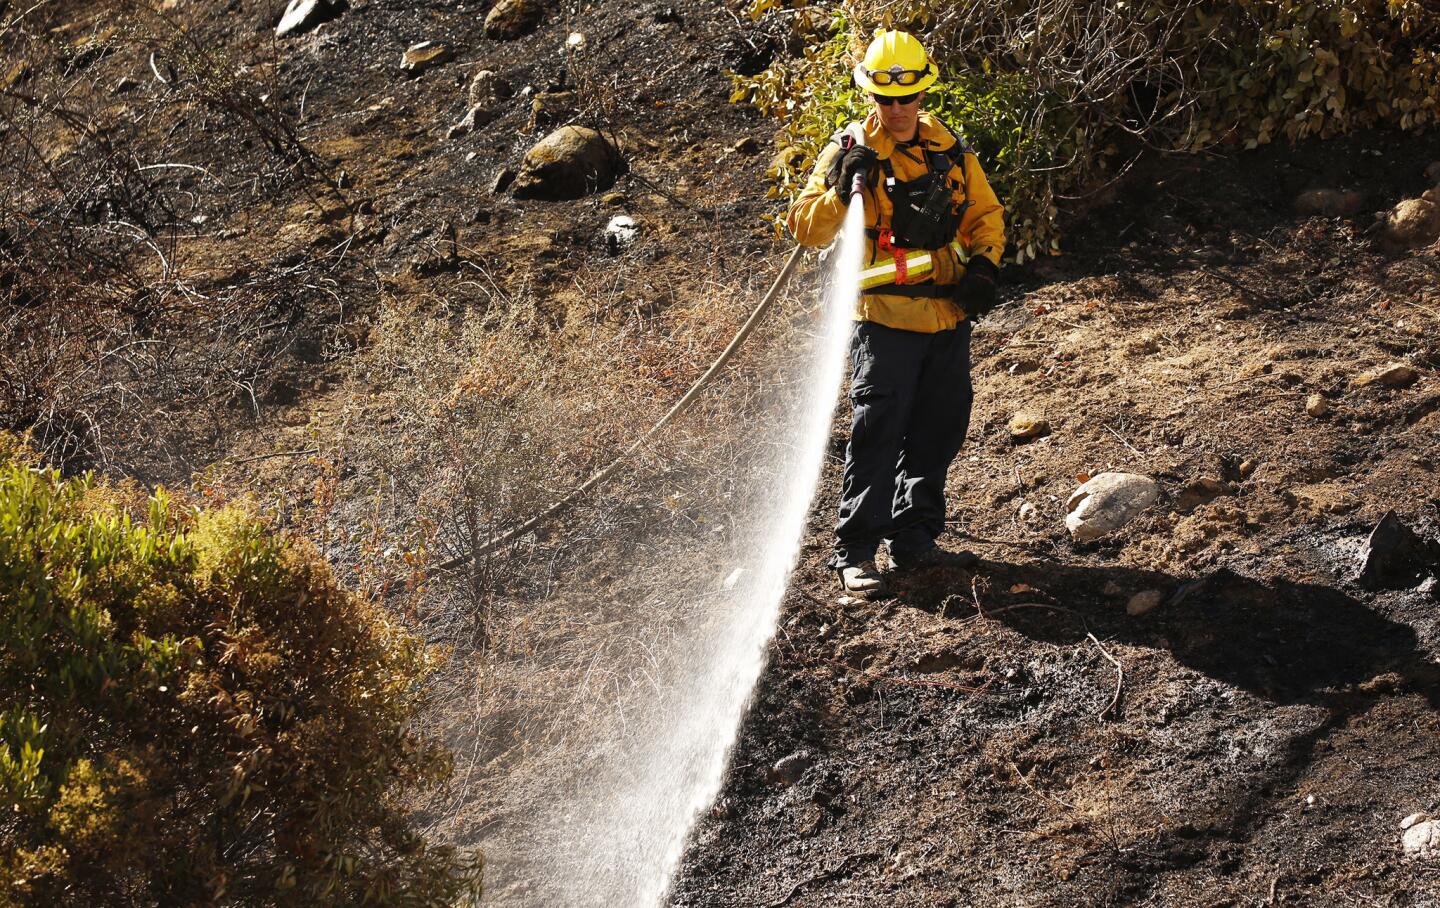 As temperatures begin to climb, Nick Spurlock with the Orange County Fire Authority waters embers on burned hills in the Placerita Canyon area of Santa Clarita.